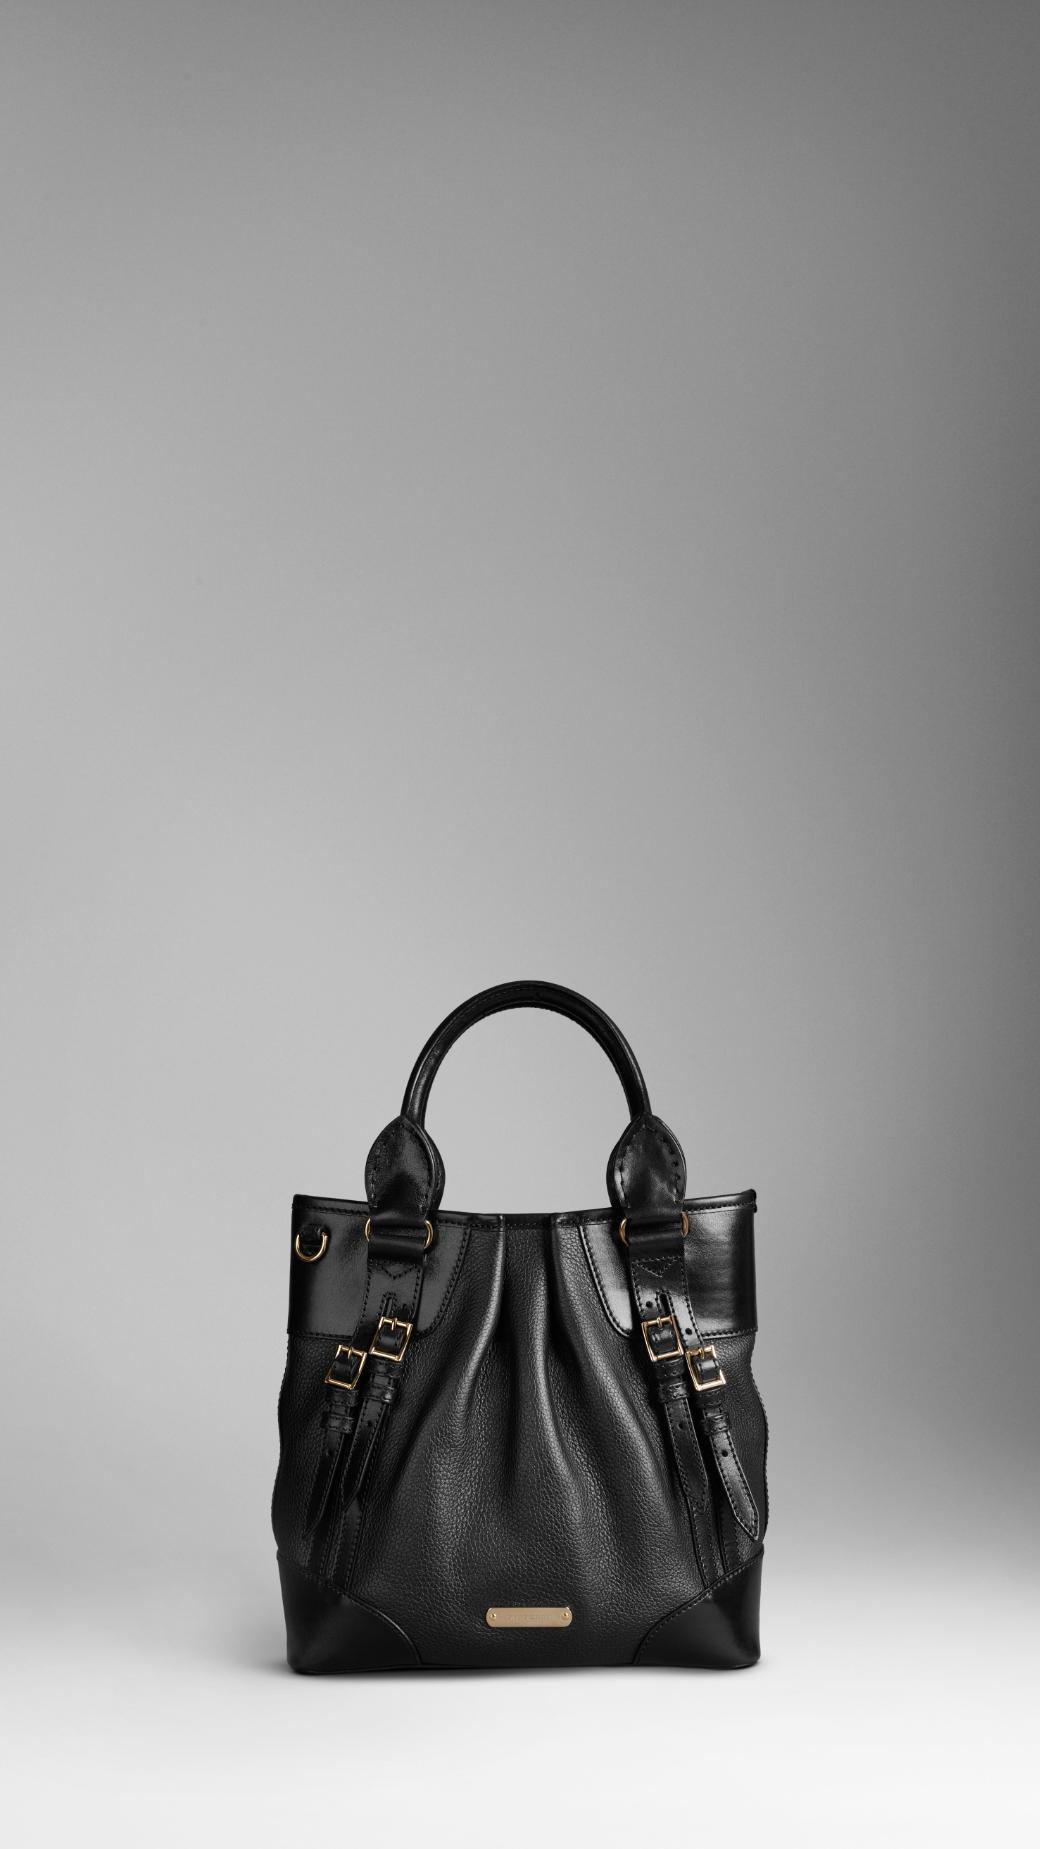 Burberry Small Leather Whipstitch Tote Bag in Black | Lyst